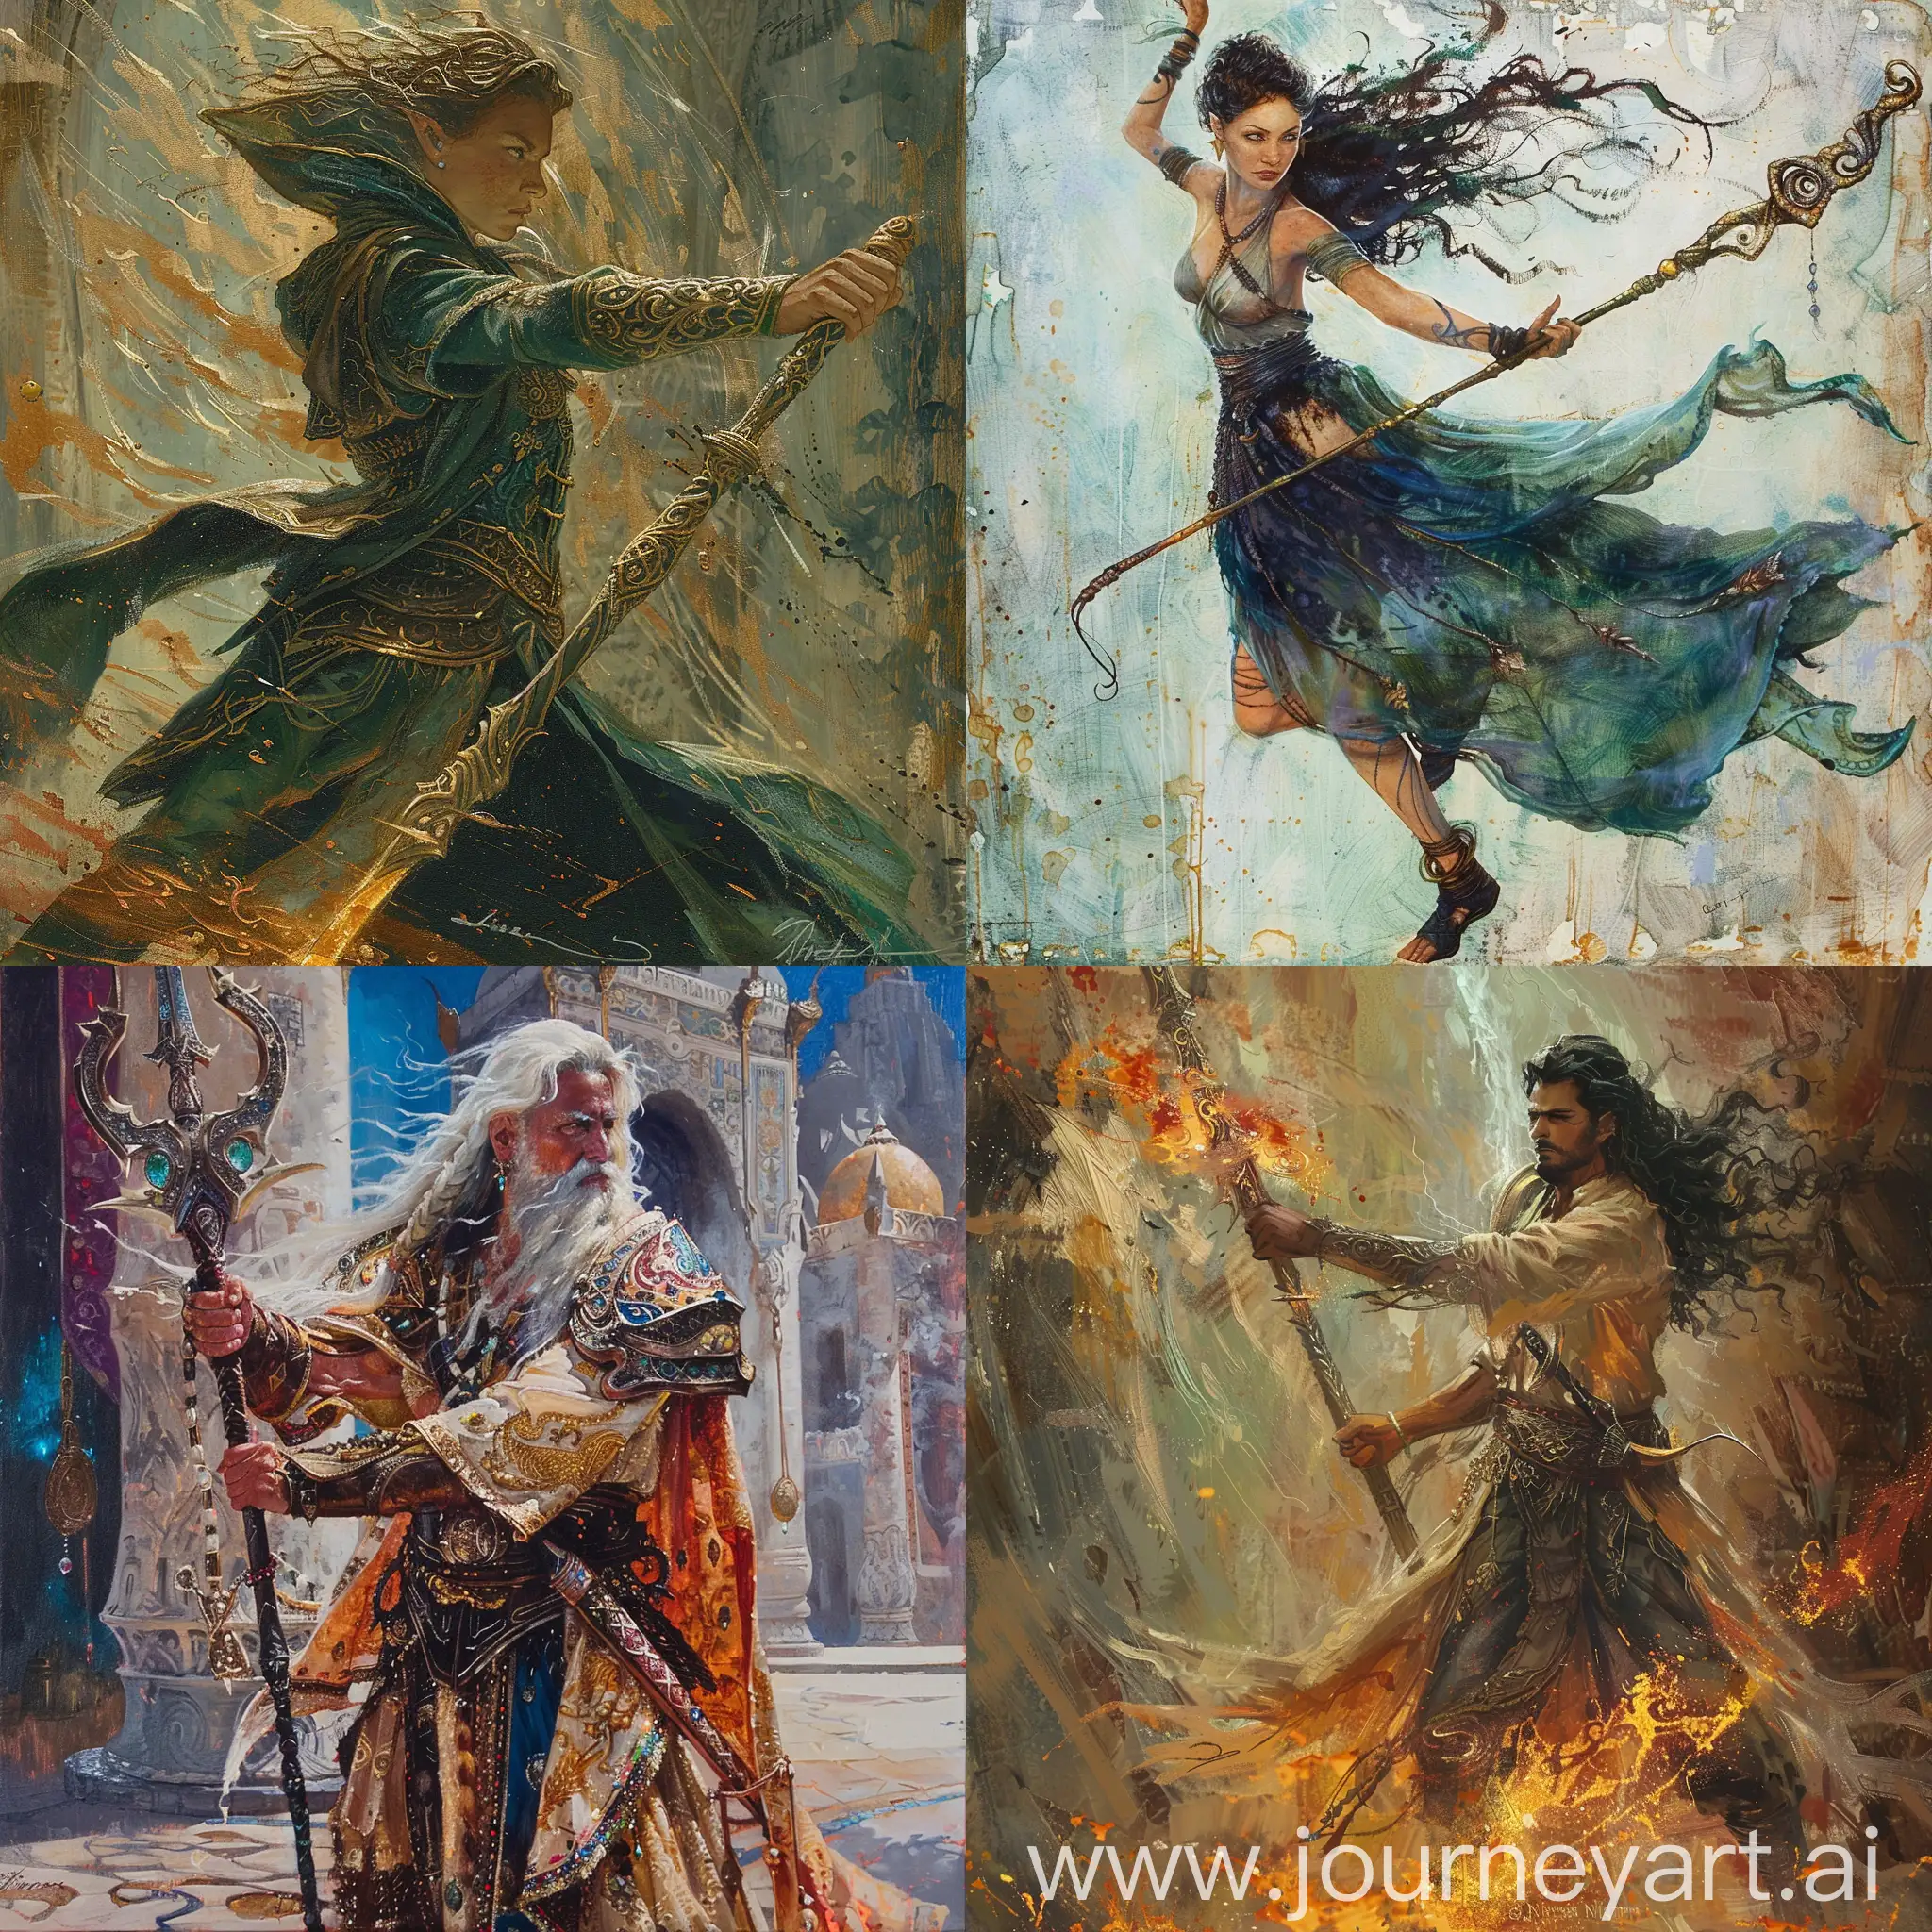 magical blessed warrior twirling an ornate spear.
In the art style of Terese Nielsen oil painting.